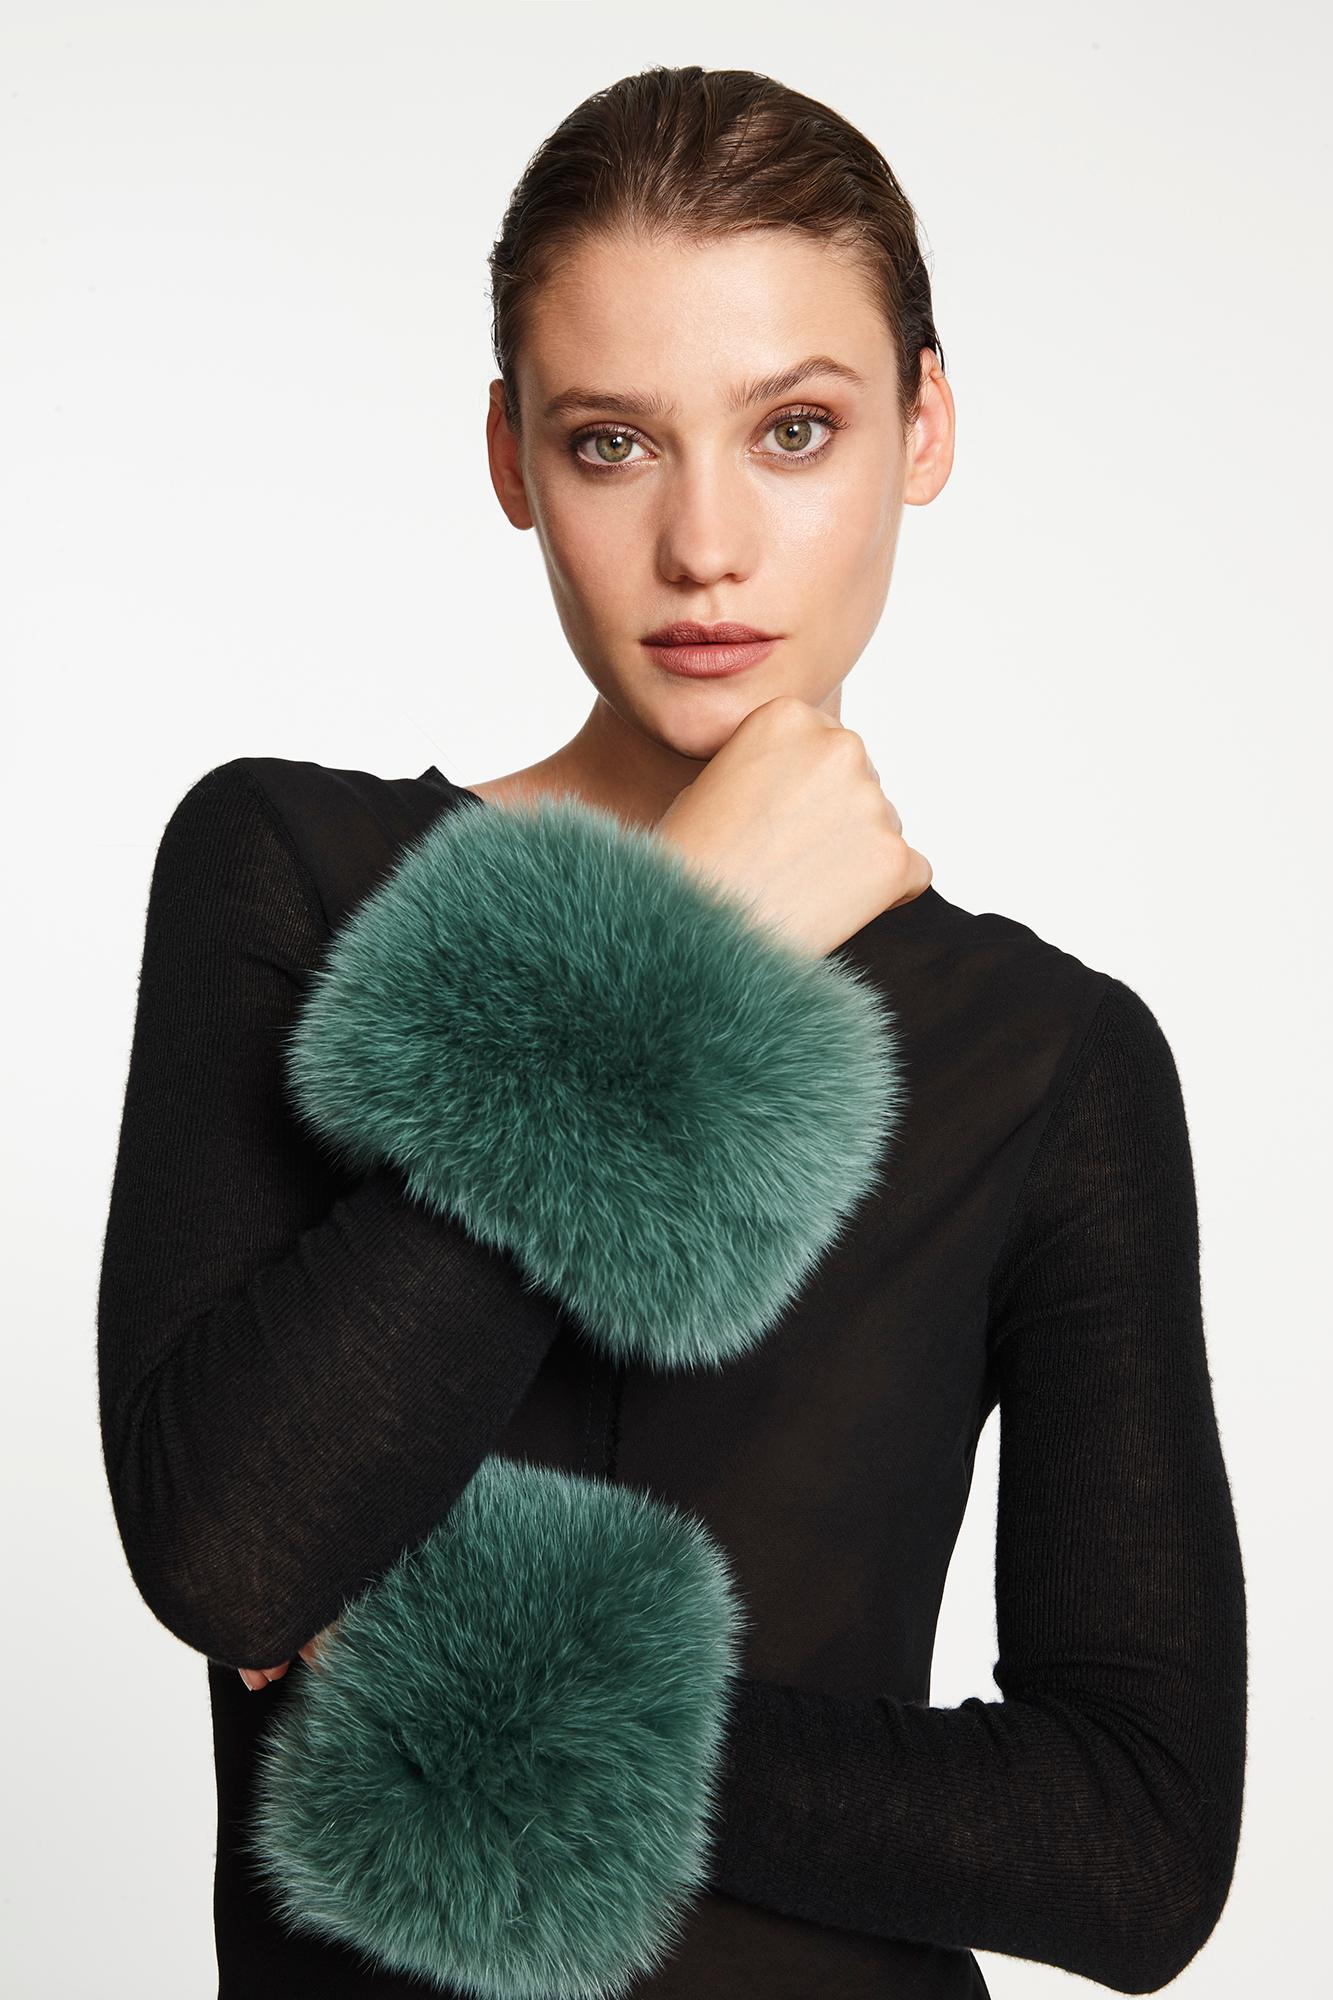 Verheyen London Snap on Jade Green Fox Fur Cuffs  - Brand New 

Verheyen London Snap on Fox Cuffs are the perfect accessory for winter/autumn dressing. Wear over any jumper or coat, these cuffs will jazz up any look and keep you staying cosy with